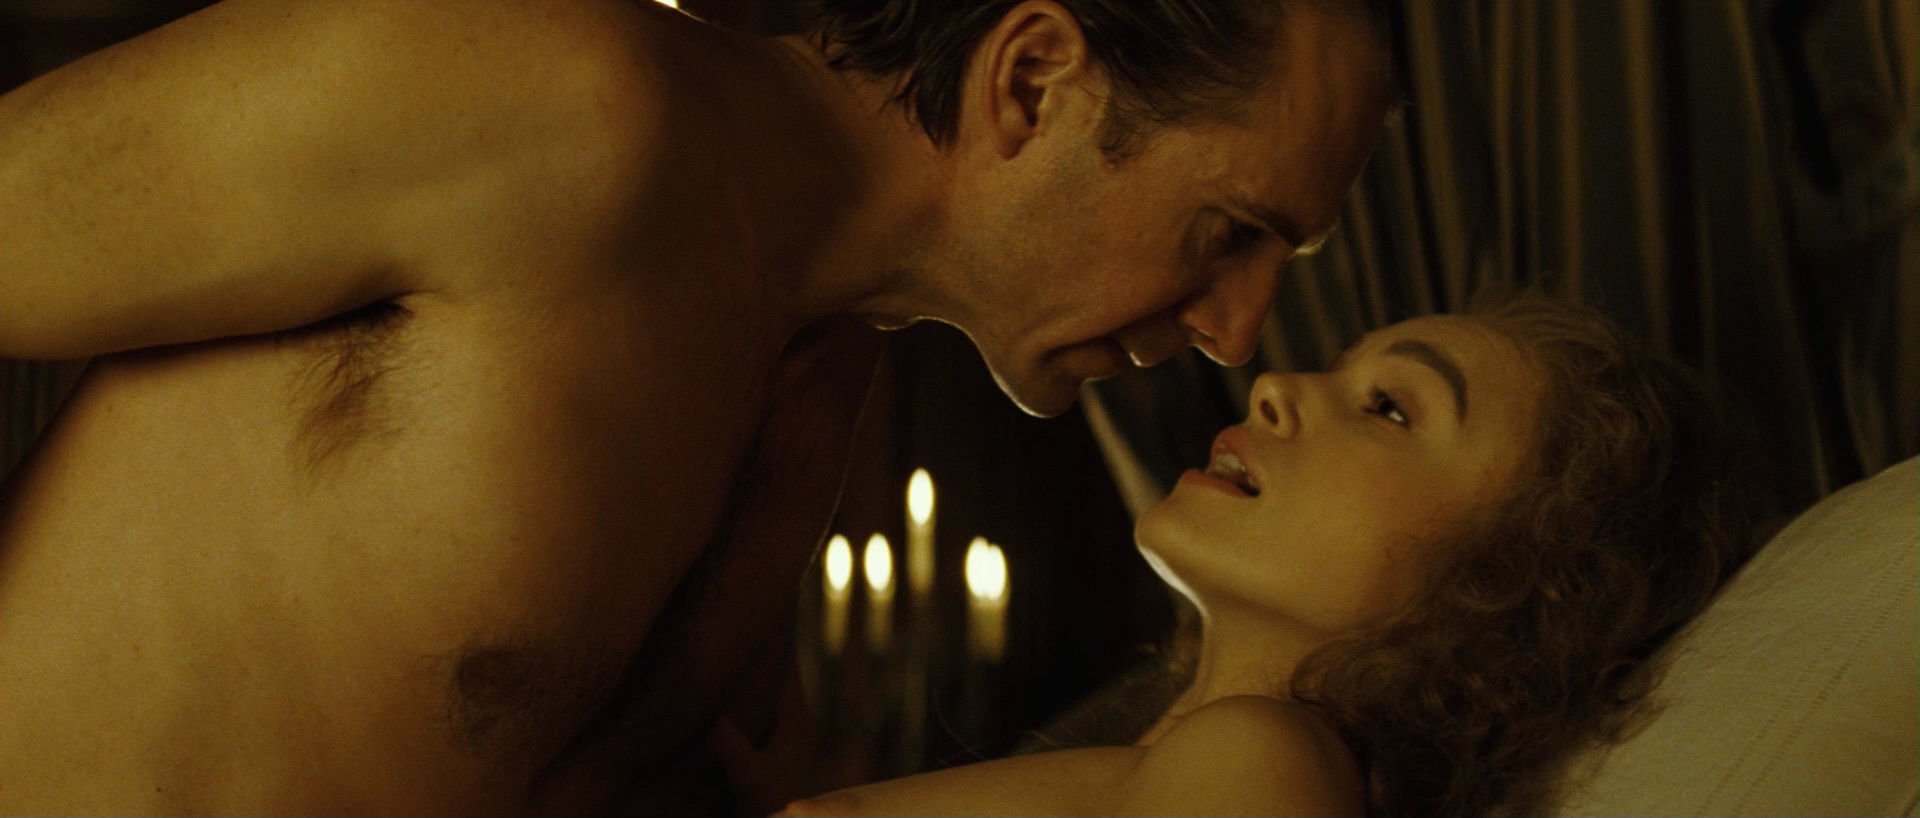 Keira Knightley Nude The Duchess 6 Pics And Video